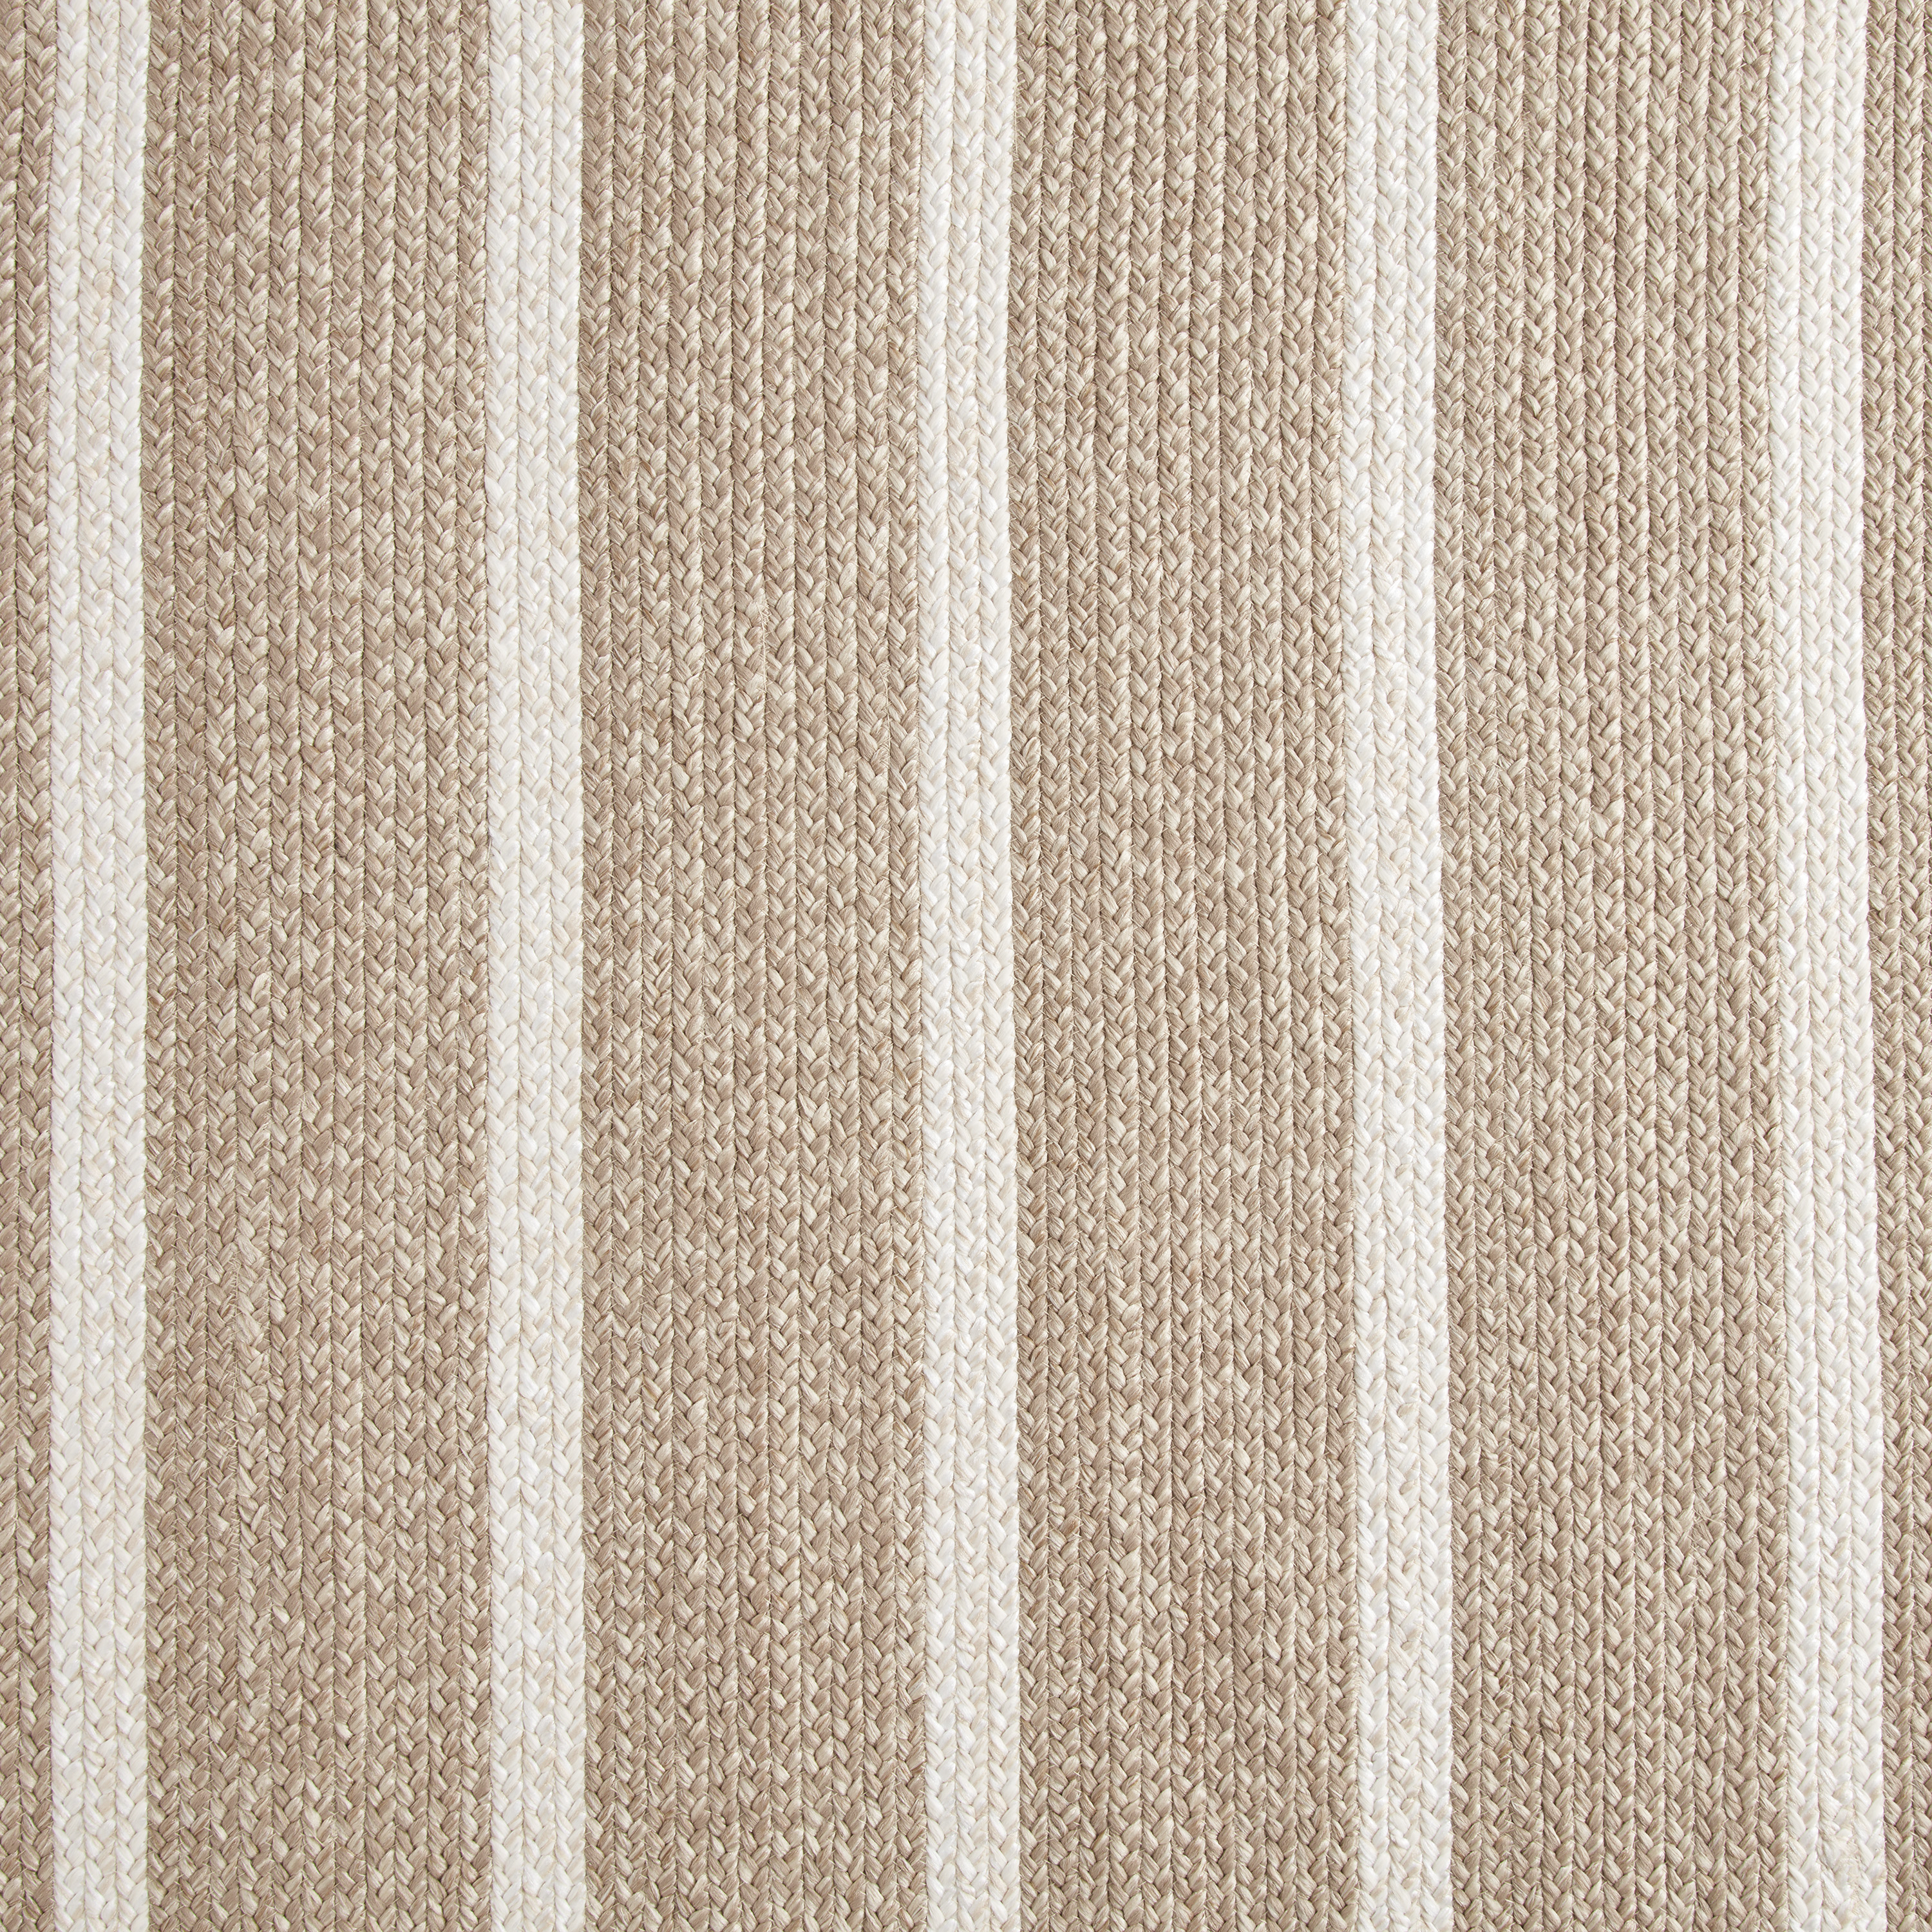 Better Homes & Gardens 5'x7' Striped Natural Outdoor Rug by Dave & Jenny Marrs - image 3 of 10